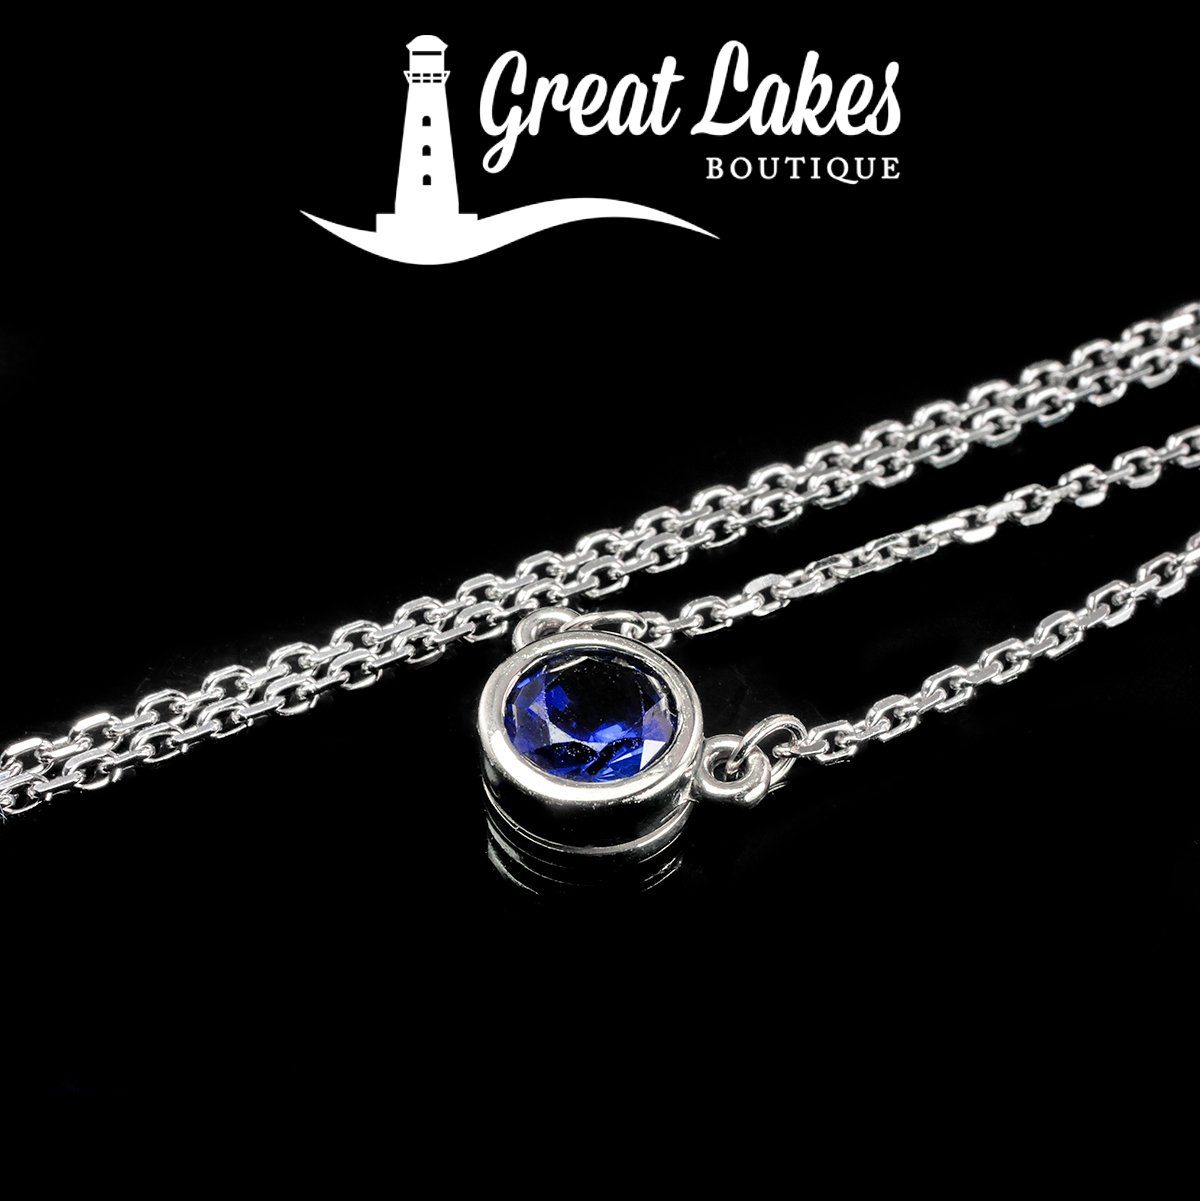 Great Lakes Boutique White Gold &amp; Sapphire Necklace